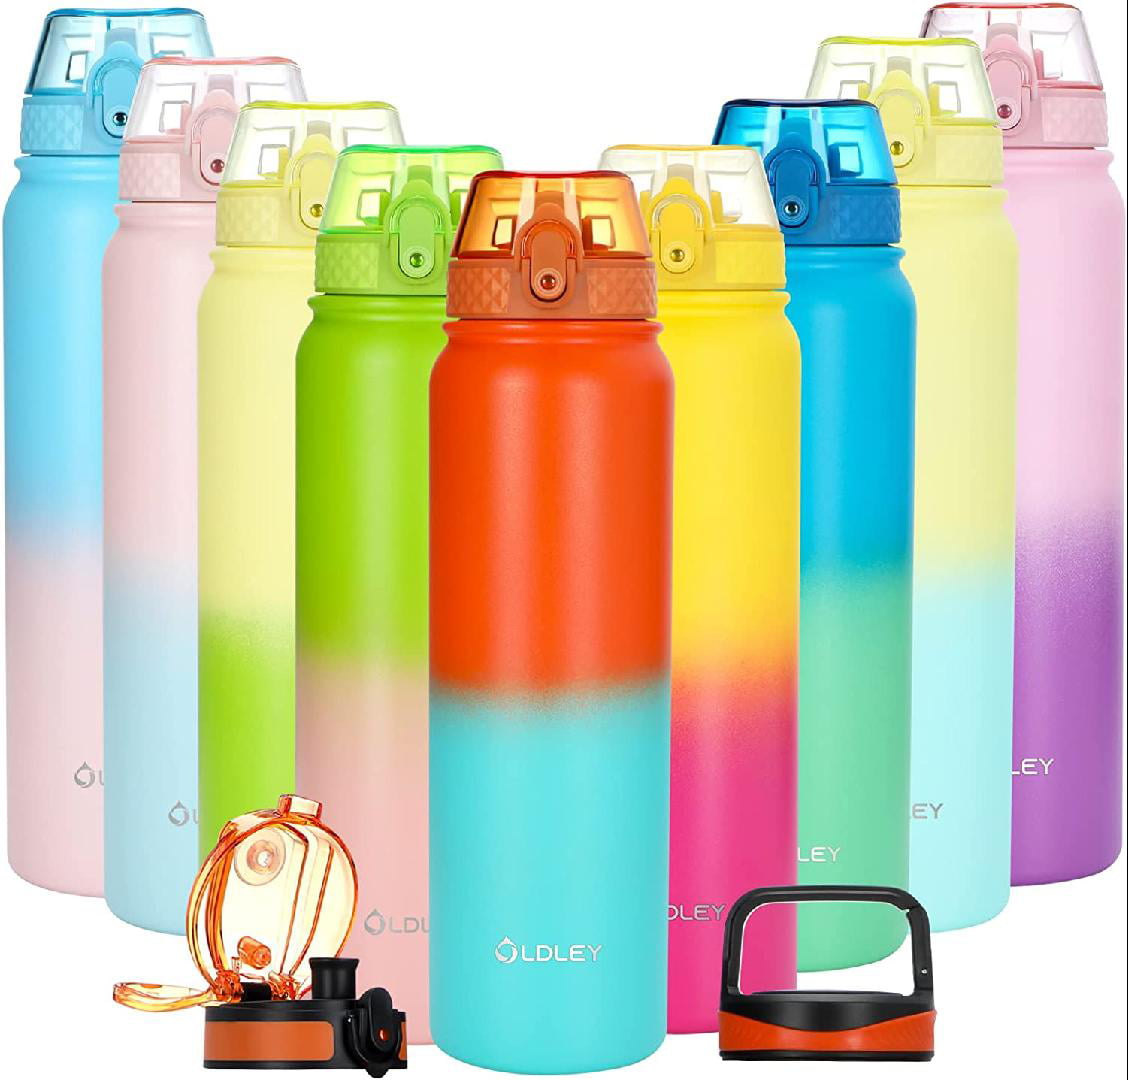 Blue Insulated Water Bottles - Includes 3 Lids (Straw Lid, Spout/Chug,  Carabiner handle), Leakproof - 32 oz Water Bottle, Capri Blue - by ONEbottle